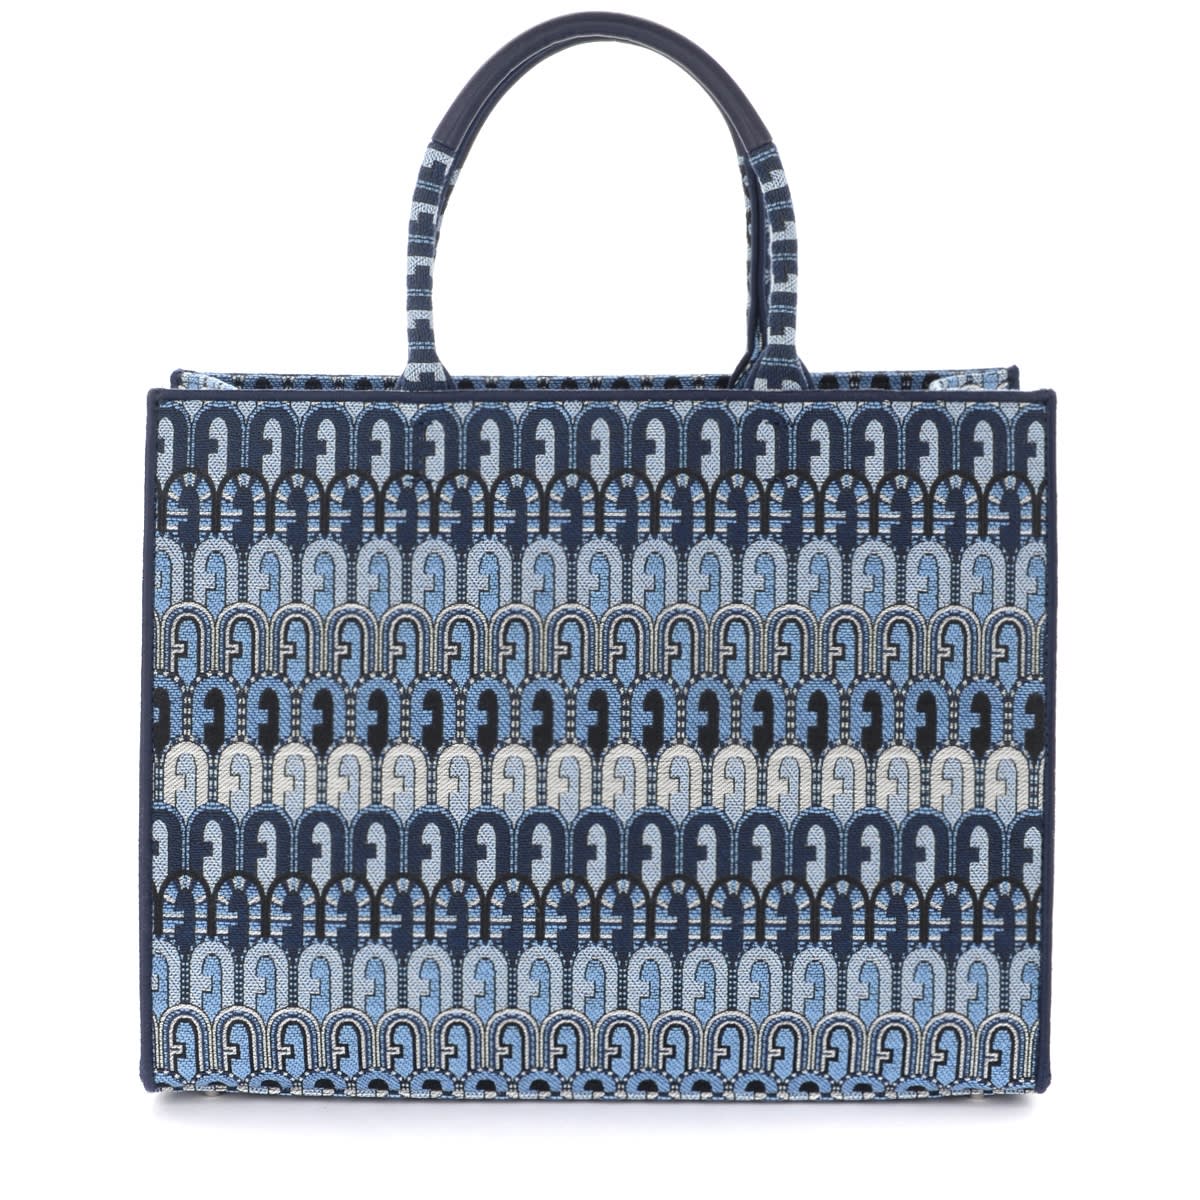 Furla Opportunity L Shopping Bag In Blue Logoed Fabric